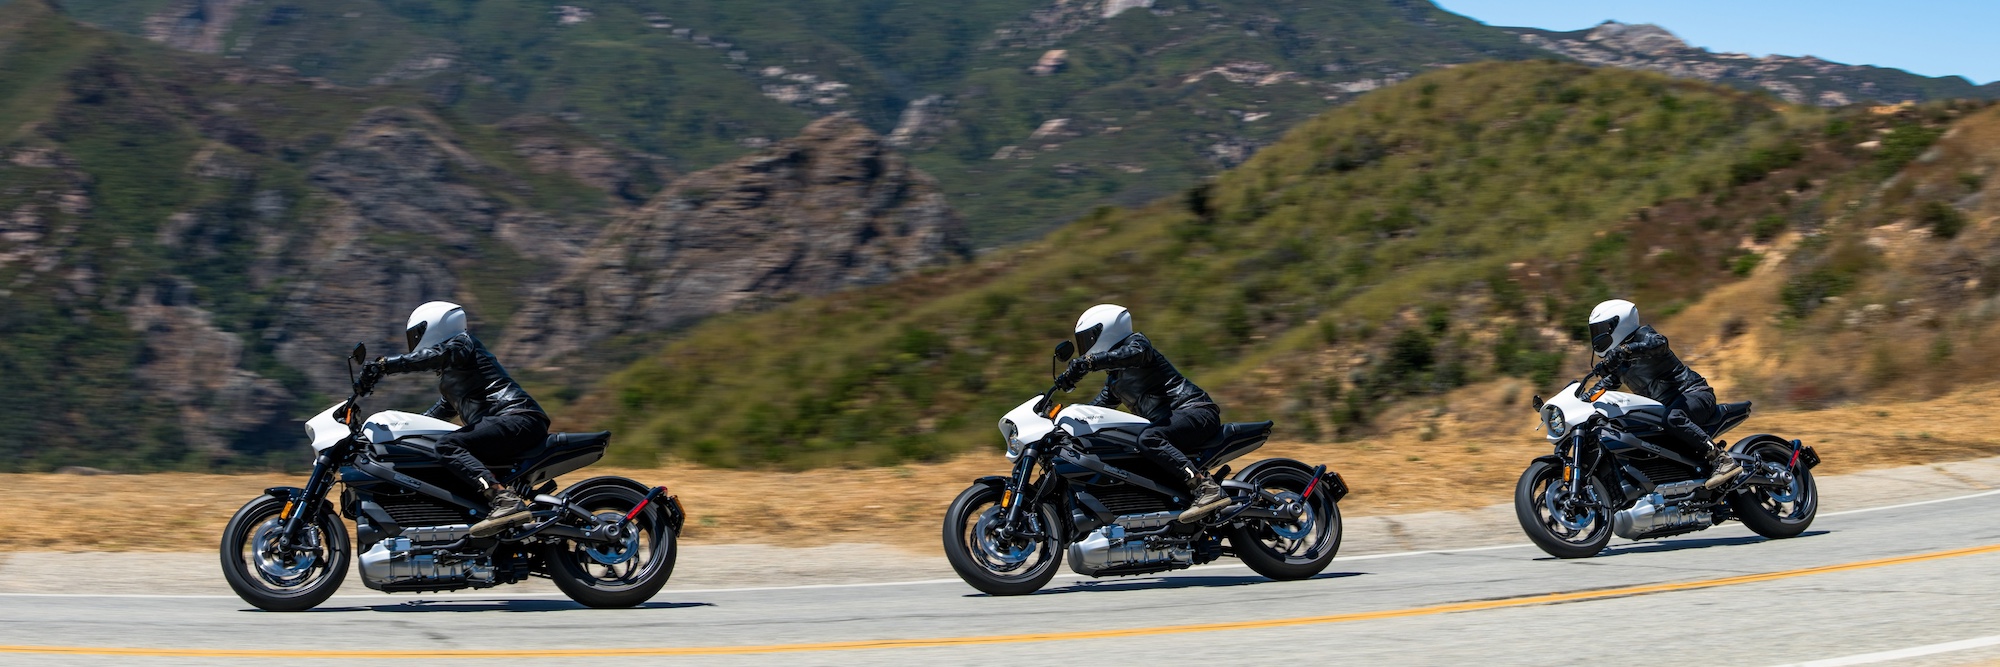 Three motorcyclists on electric motorcycles.